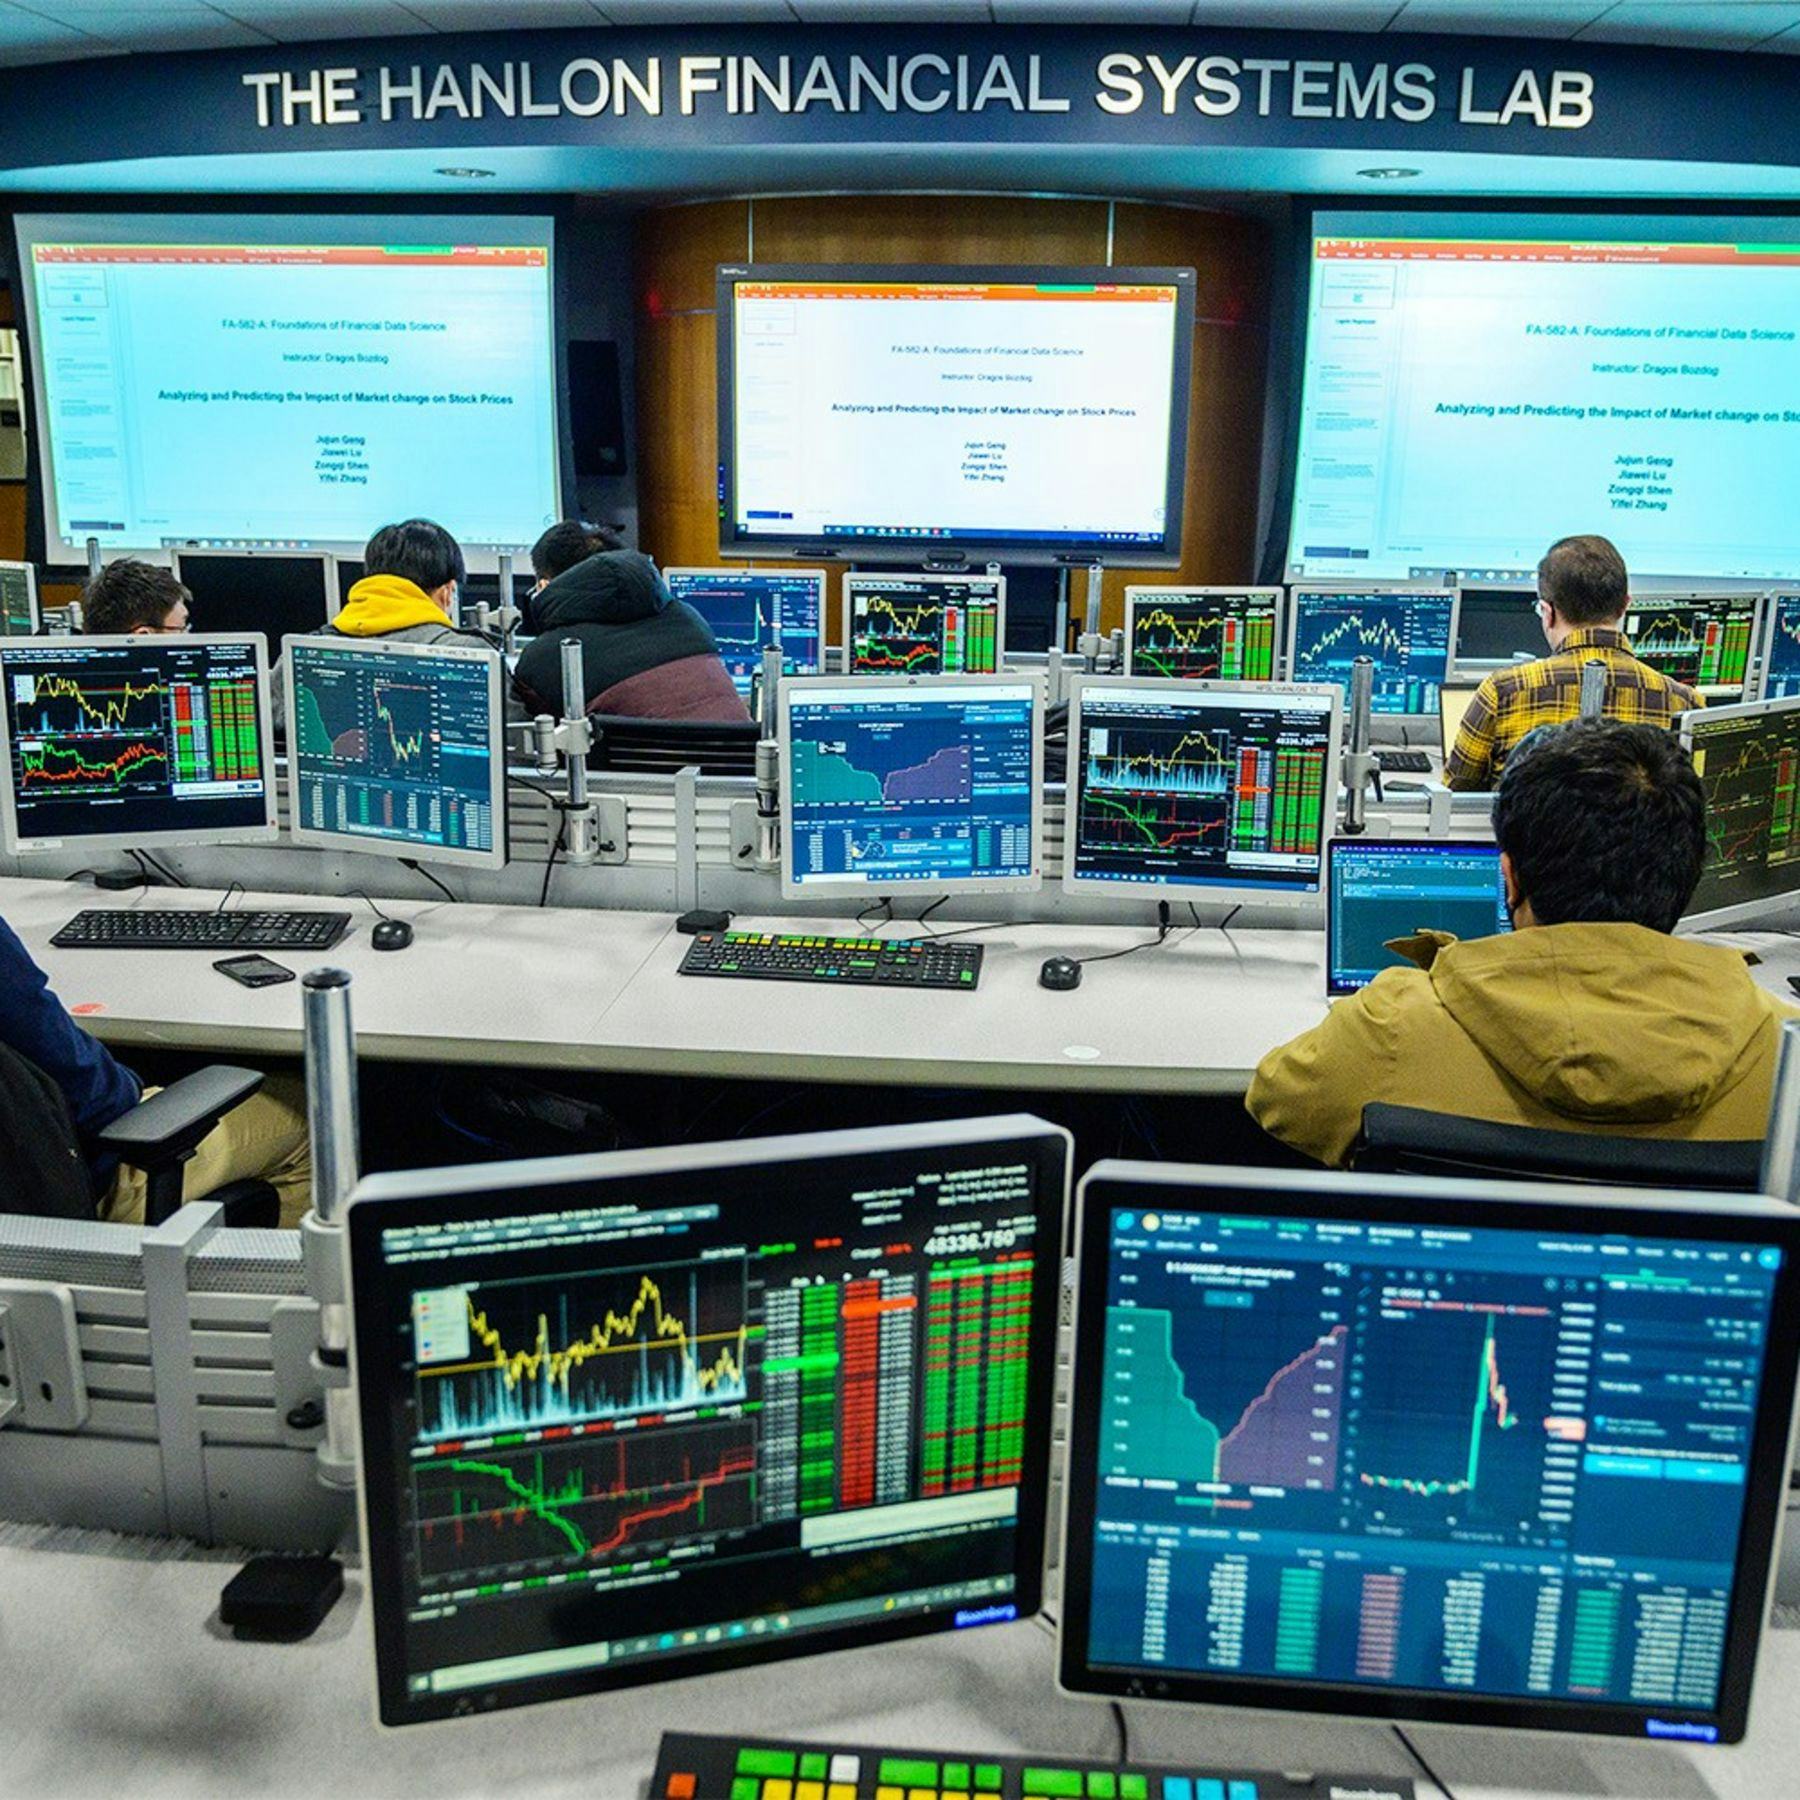 view of Hanlon Center from the back, with computer screens showing stock charts